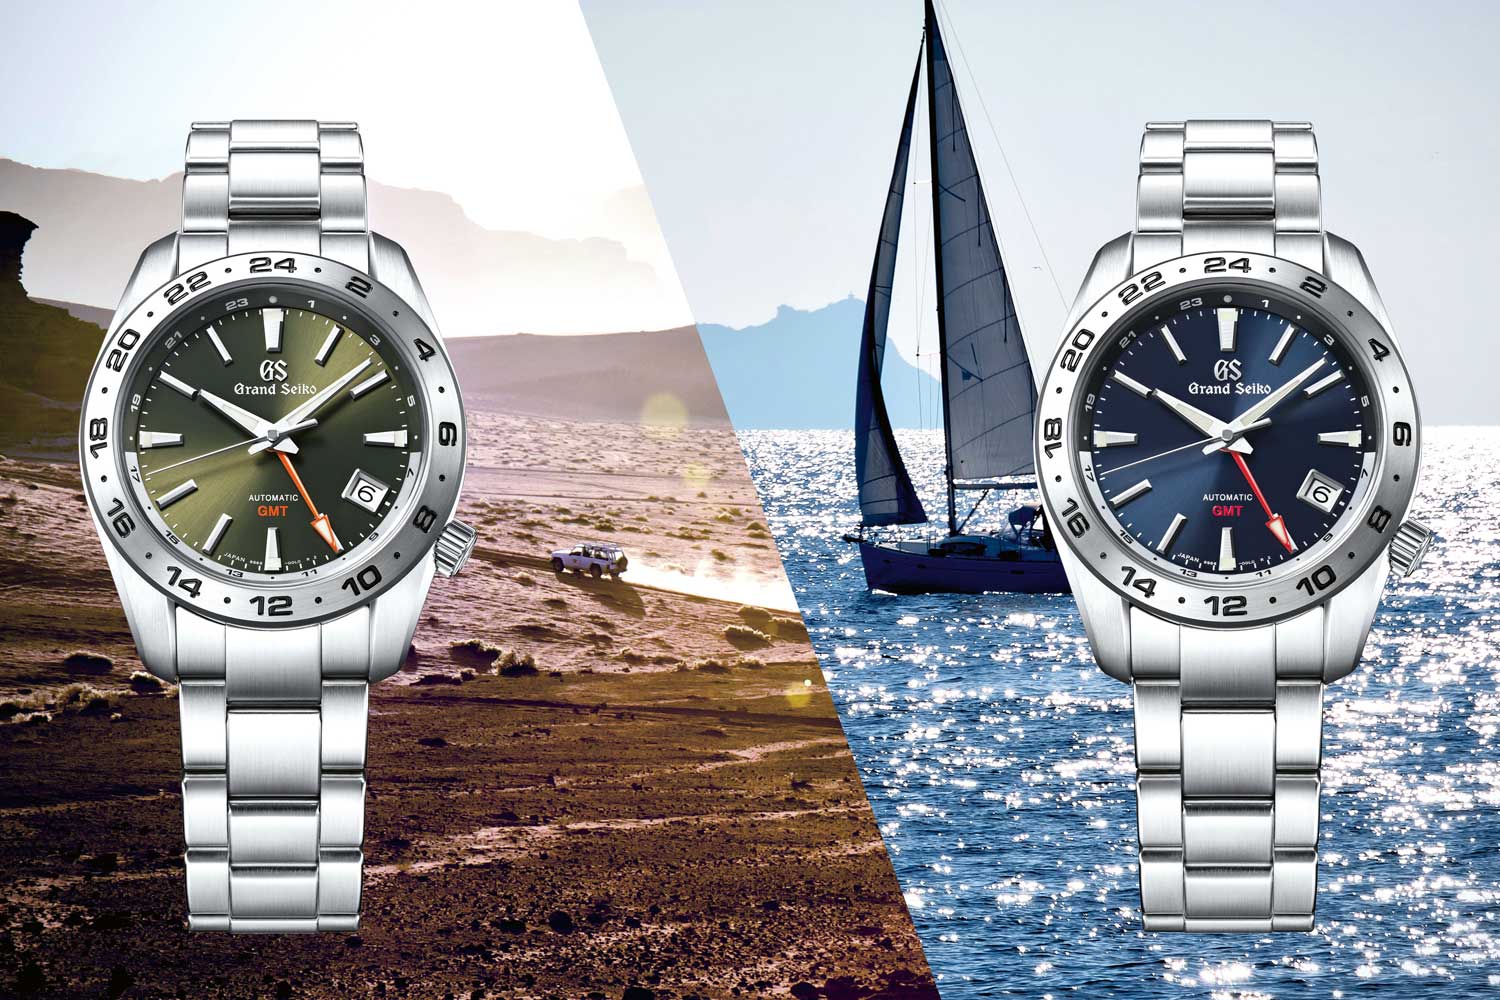 Grand Seiko’s latest automatic GMTs look the part and are built to last